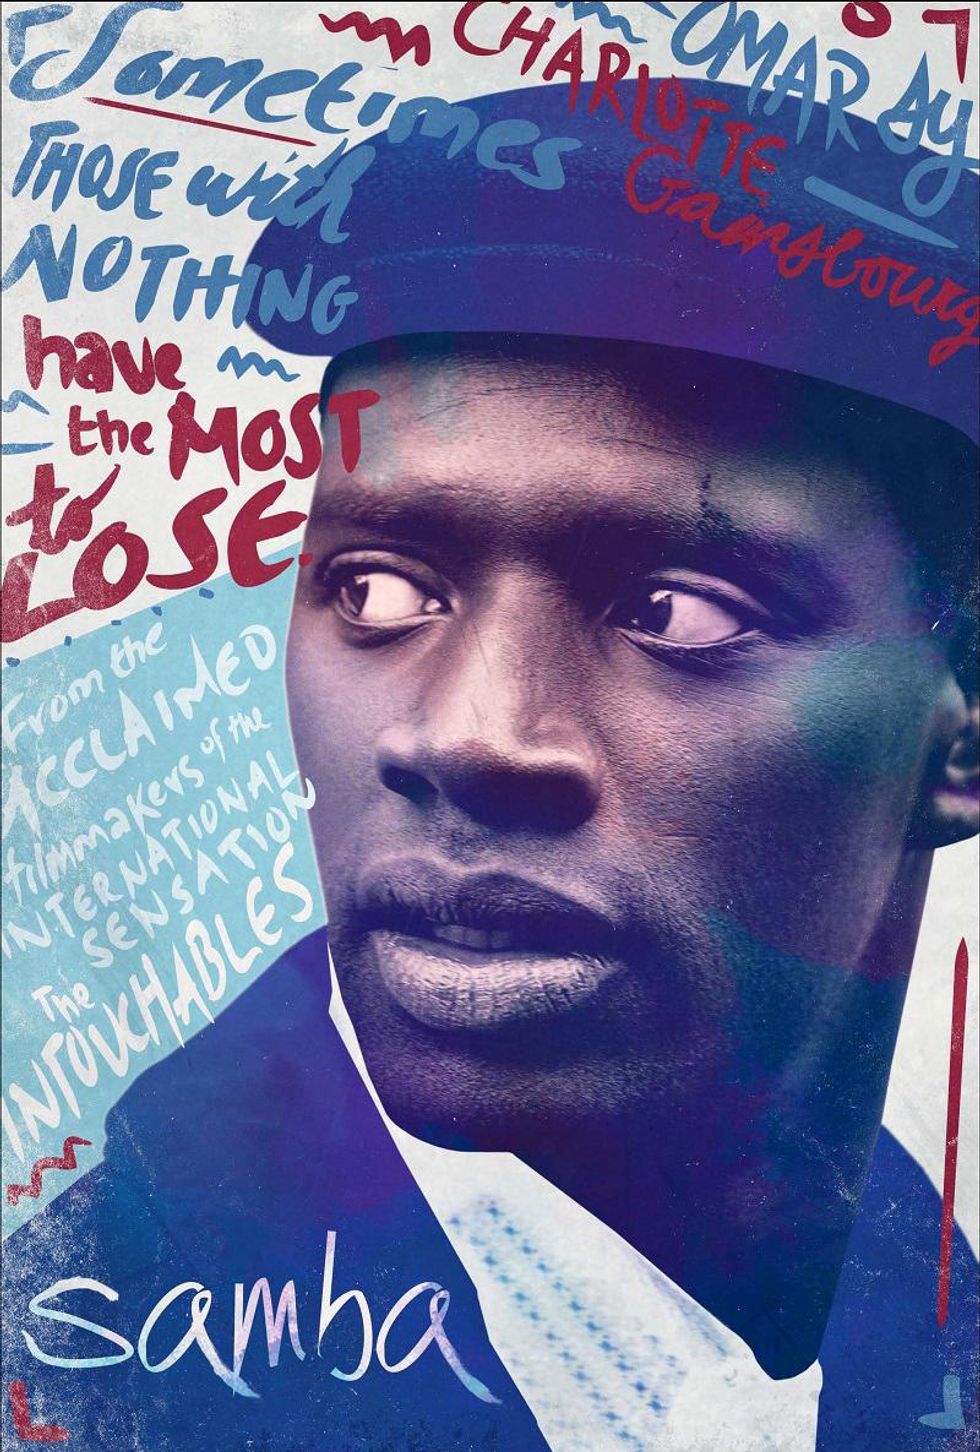 Omar Sy Stars As An Undocumented Senegalese Worker In French Comedy-Drama 'Samba'